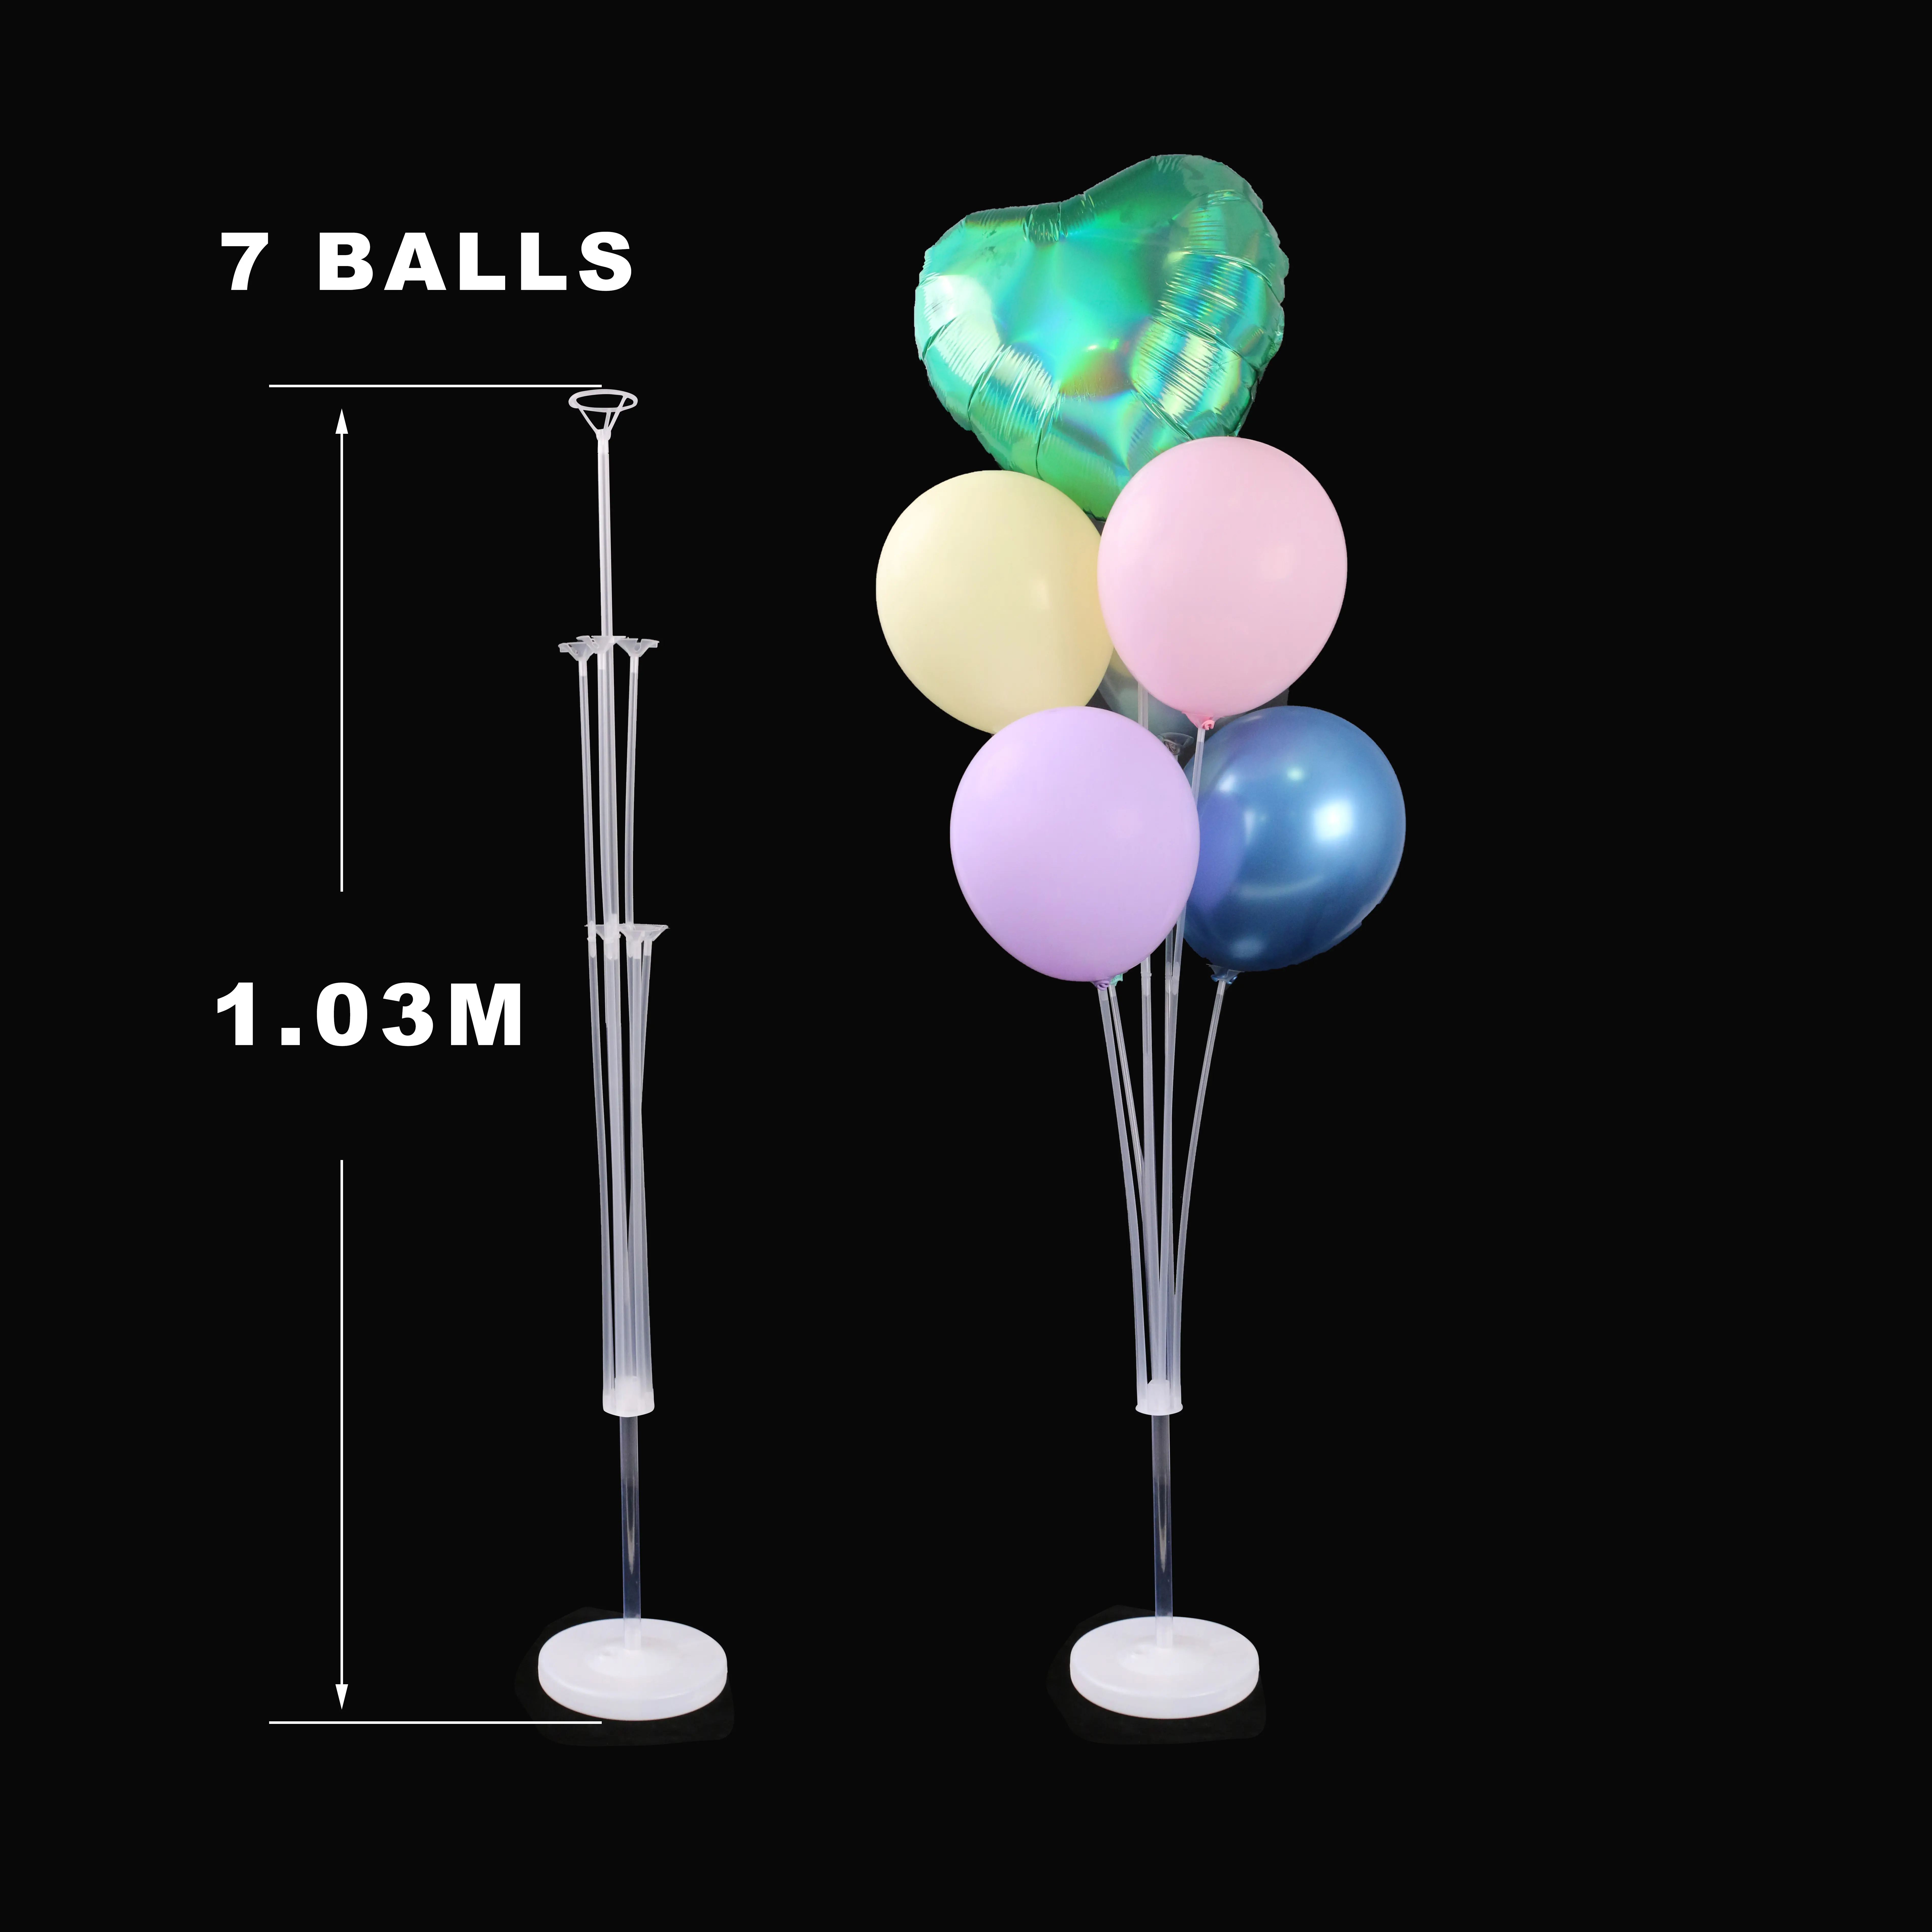 7 balls Balloon Stick Stand  Balloon Base with Pole and Cup Table Desktop Centerpiece Holder for Birthday Party  Wedding